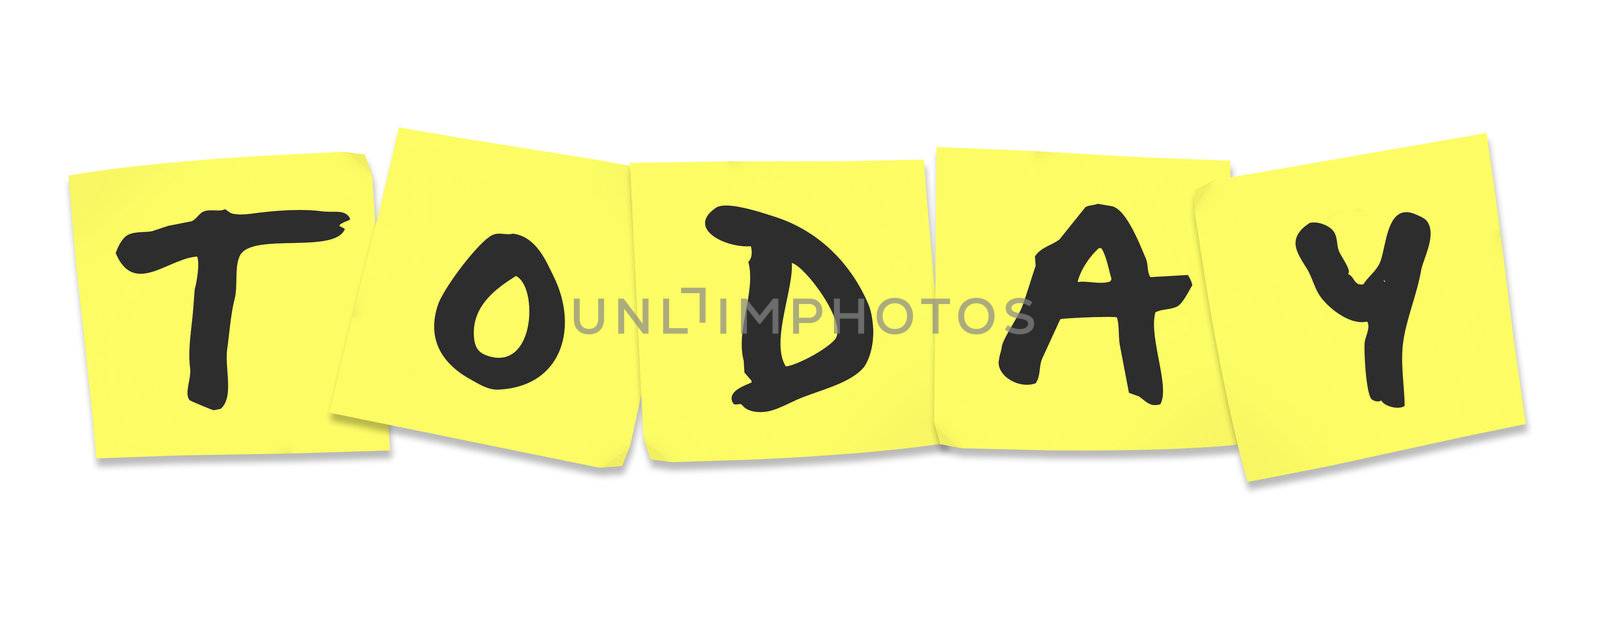 Today Word on Yellow Sticky Notes To-Do Reminder by iQoncept